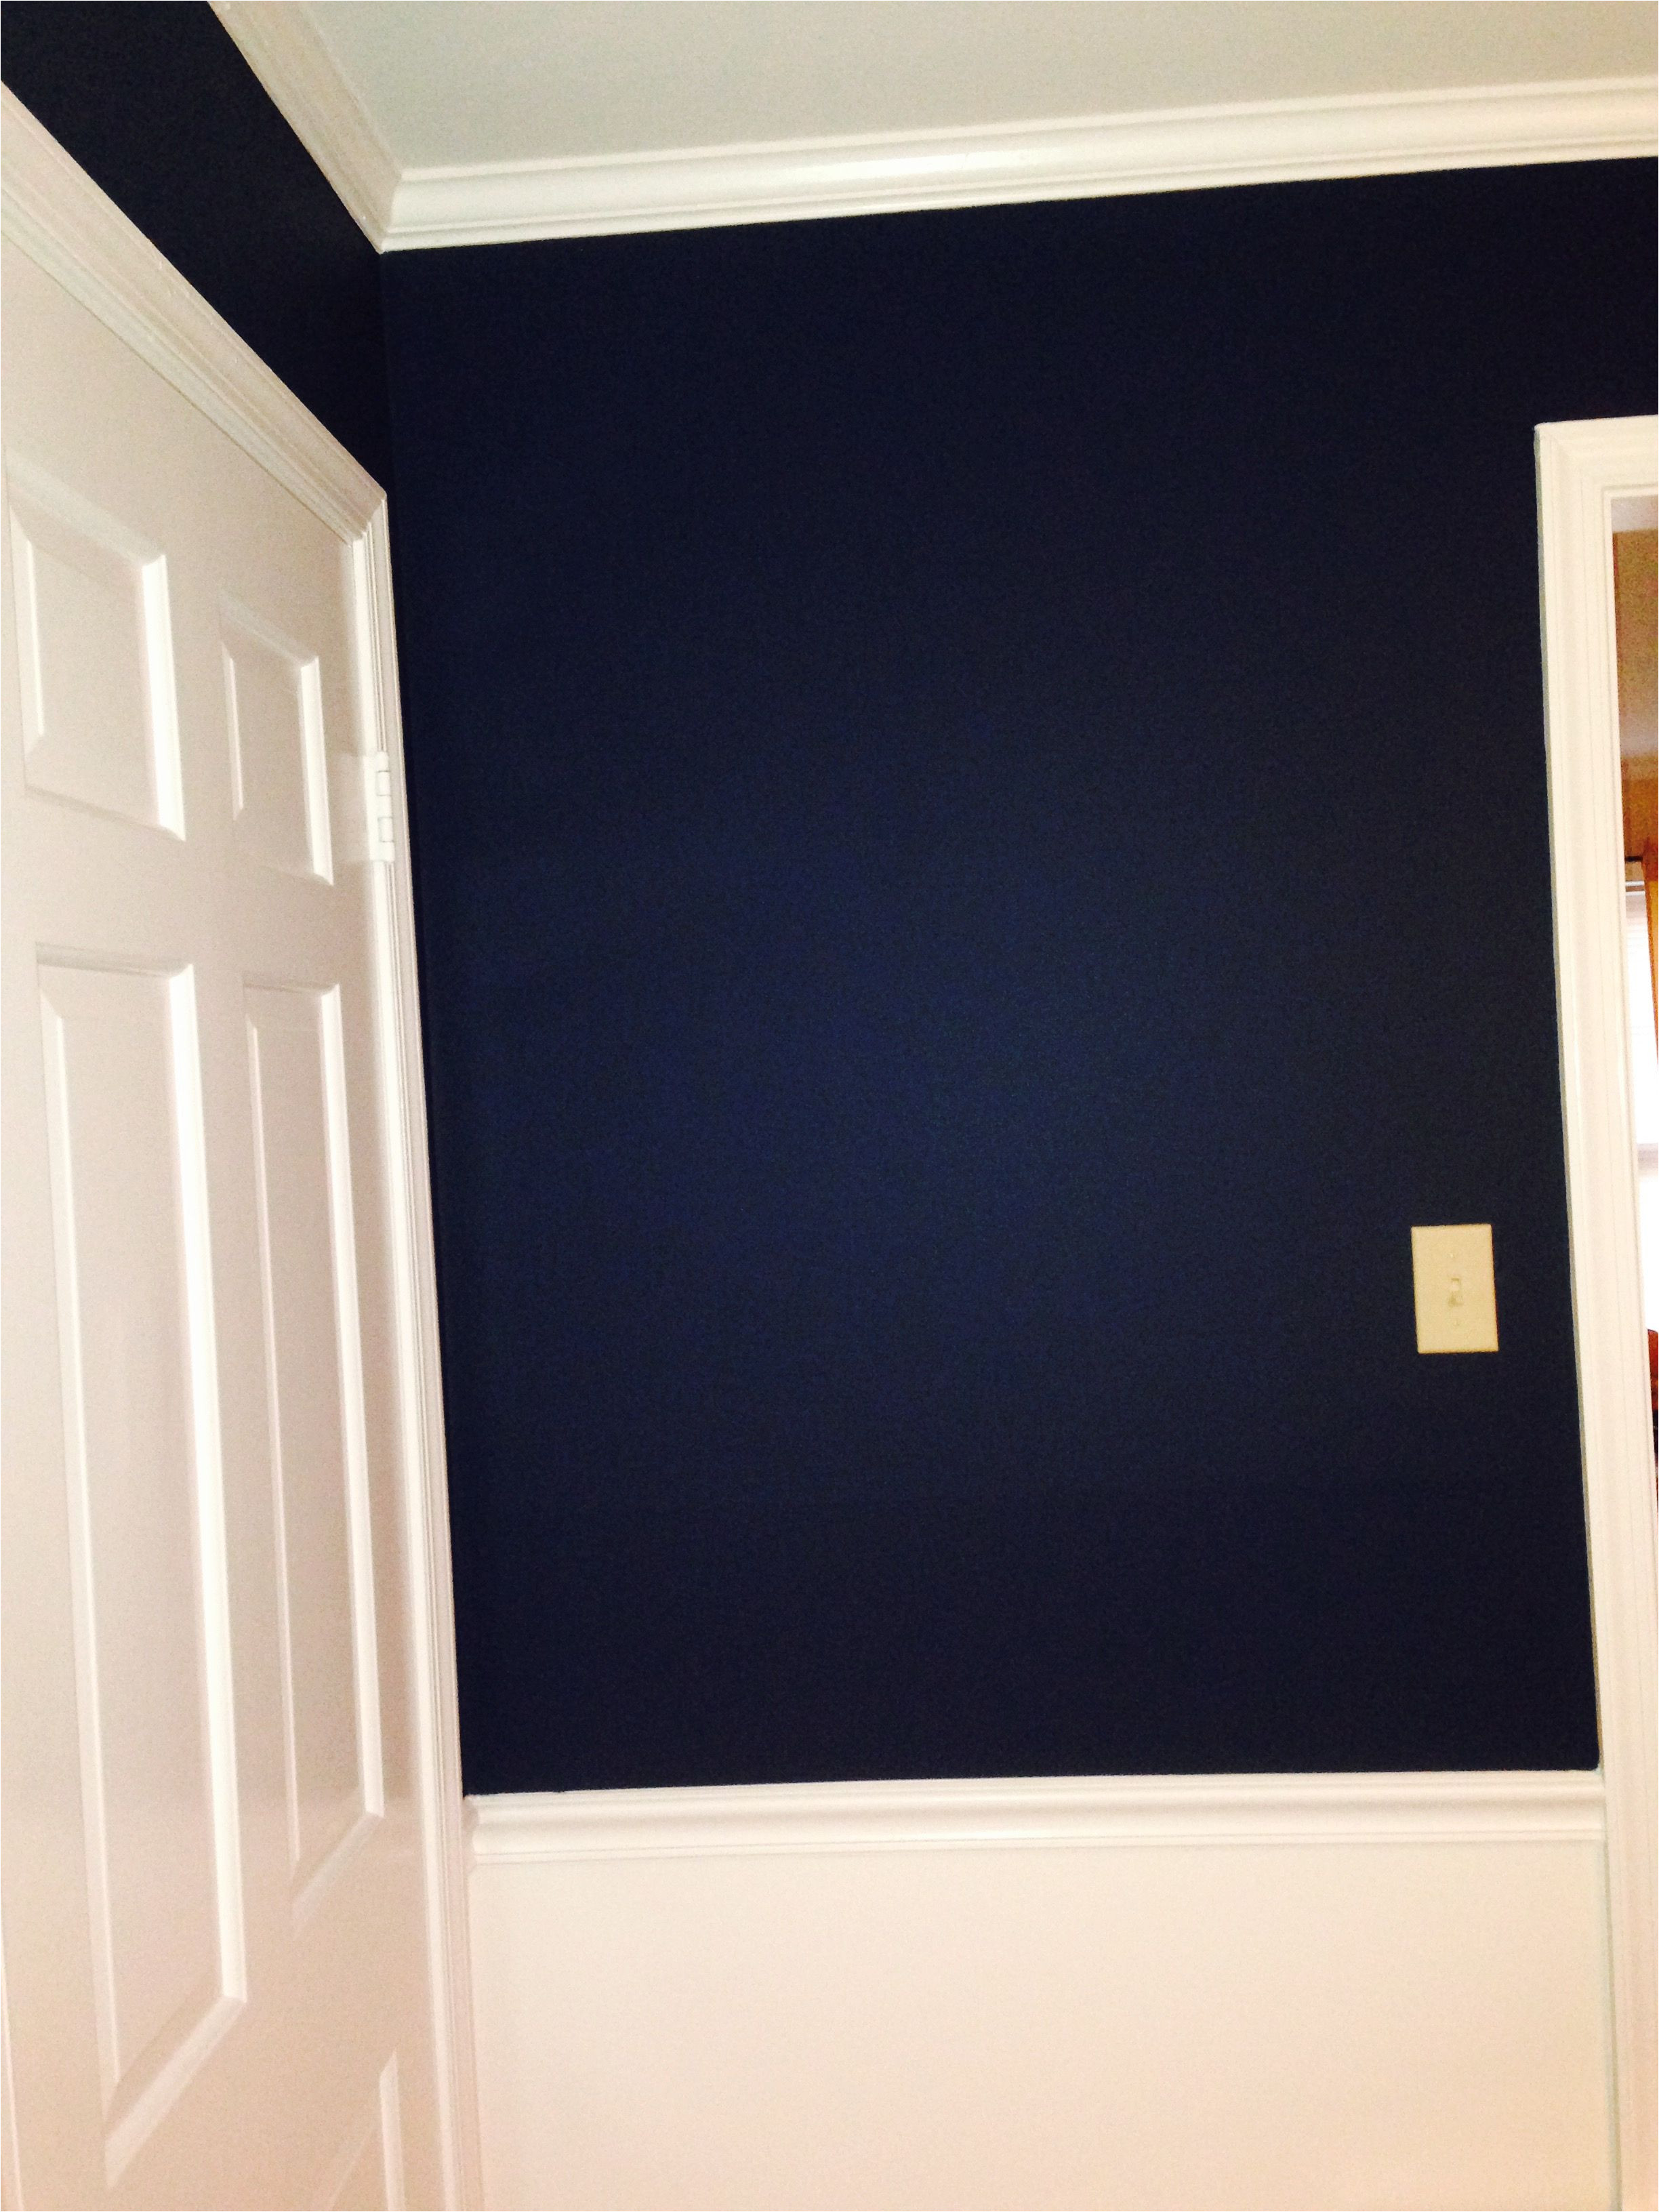 wall color is washington blue by benjamin moore cw 630 and harwood putty cw 5